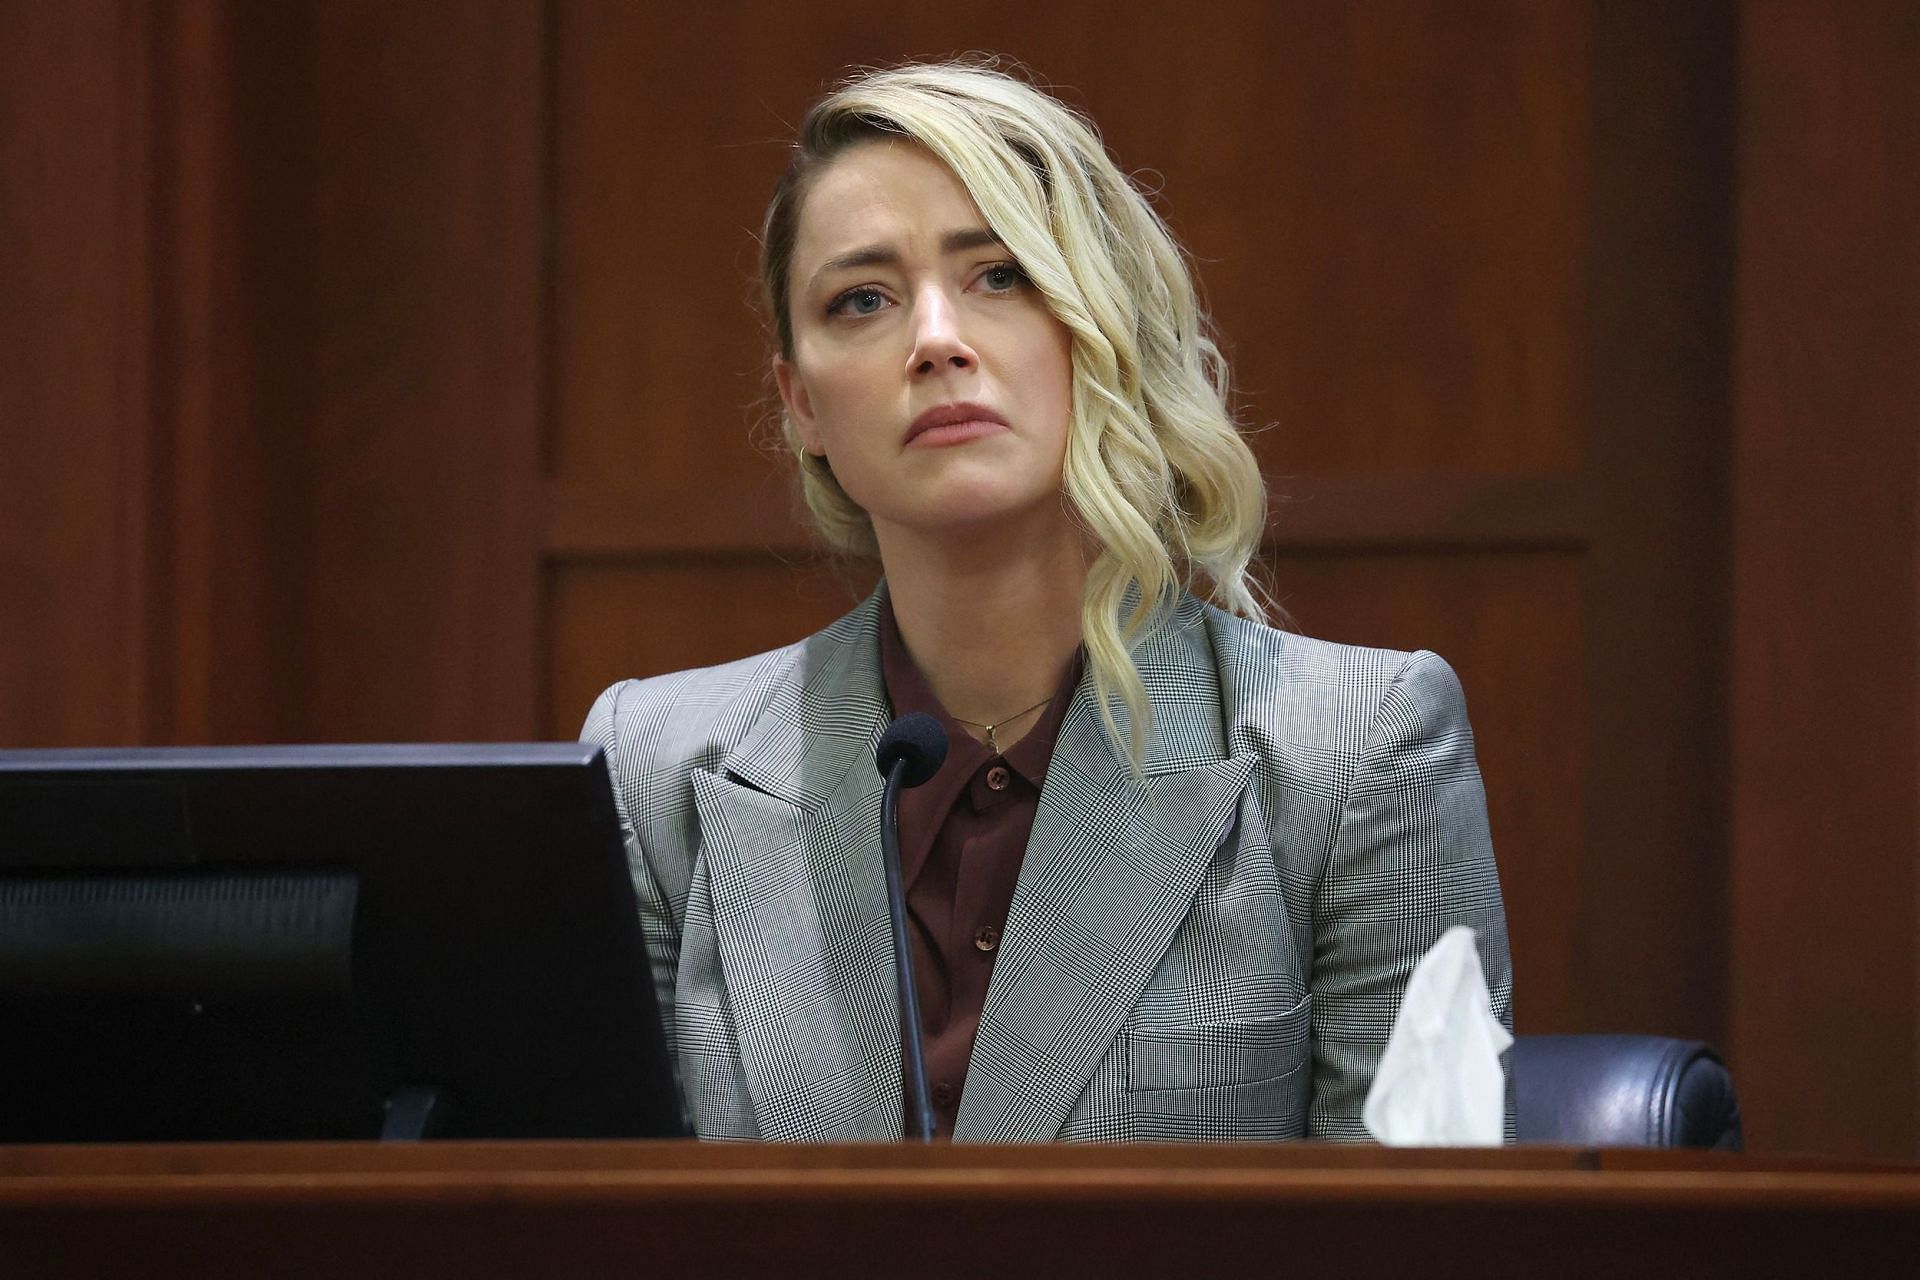 Amber Heard in the trial (Image via Michael Reynolds/Pool/AFP/Getty Images)